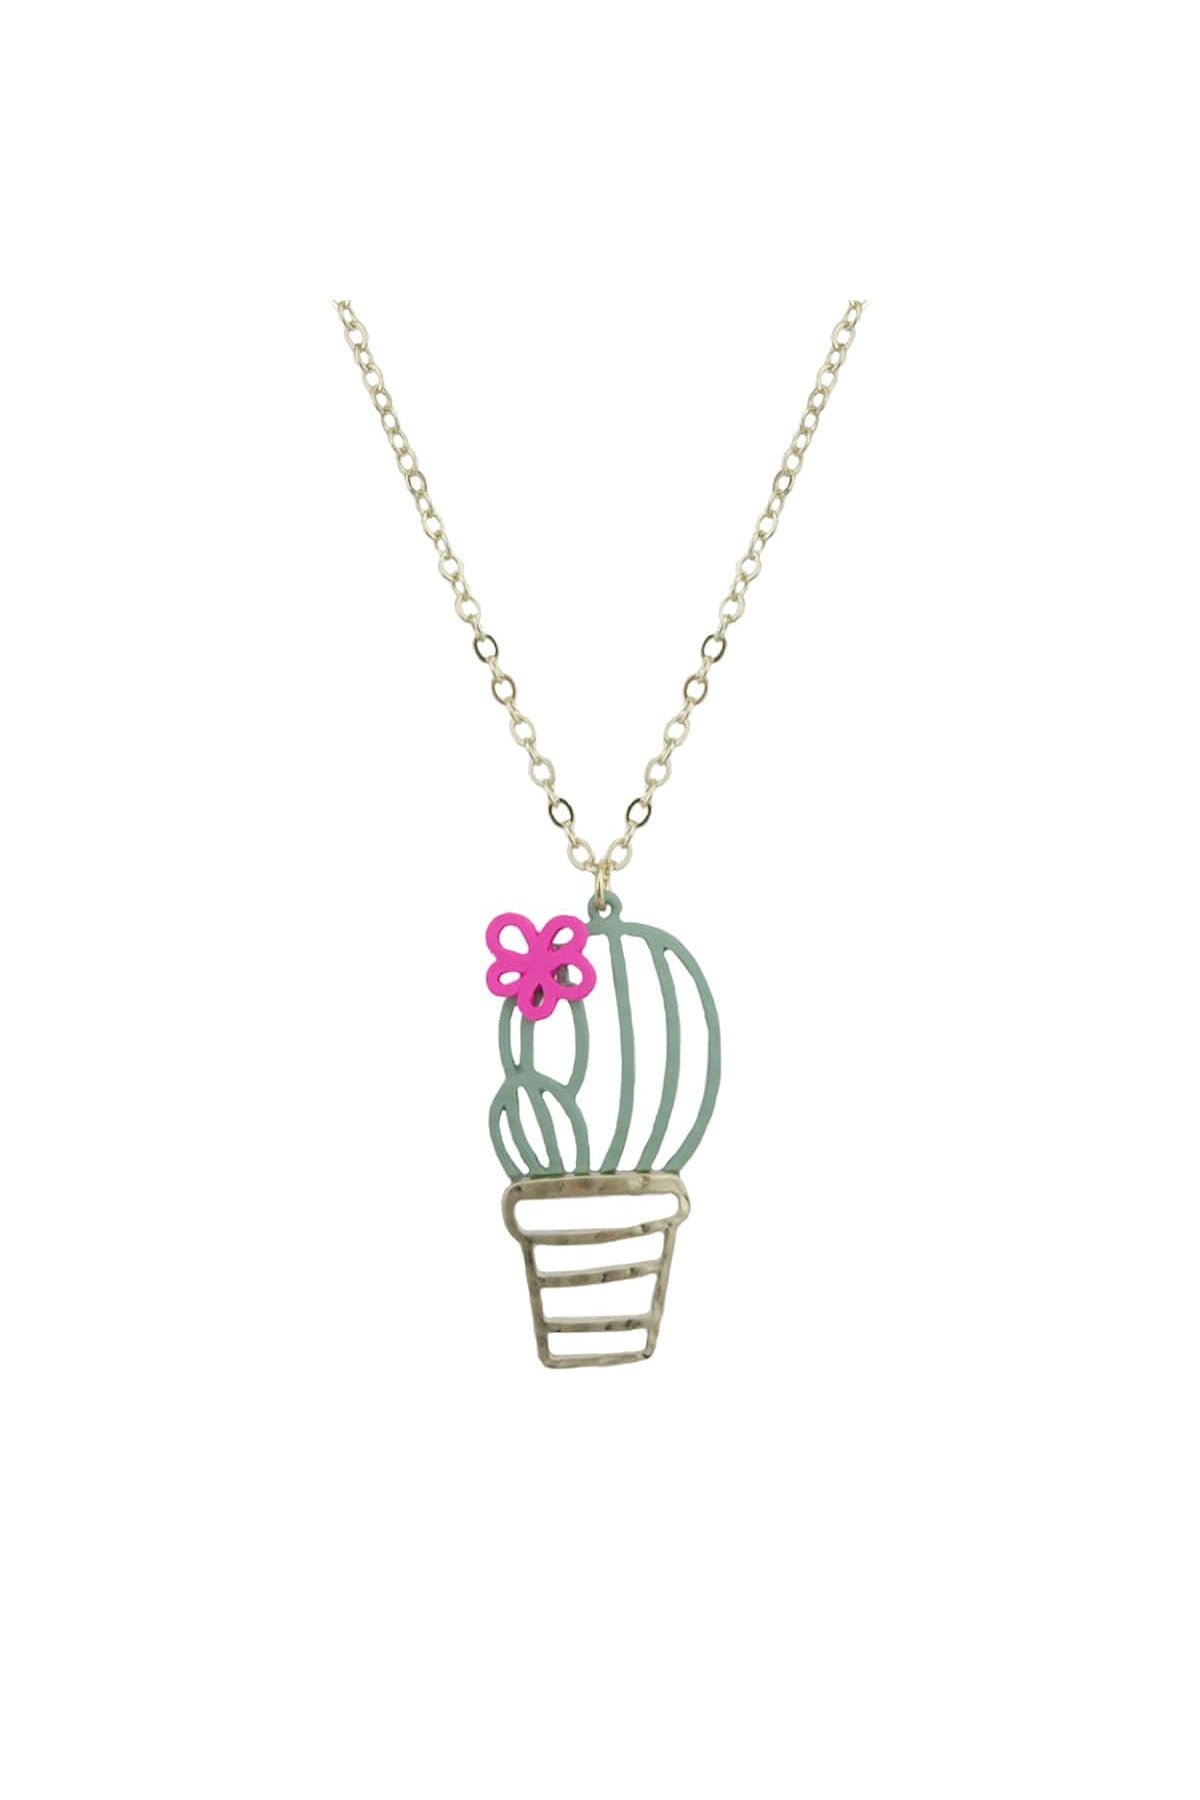 Crystal Avenue Metal Link Chain Necklace With Cactus In A Pot Pendant